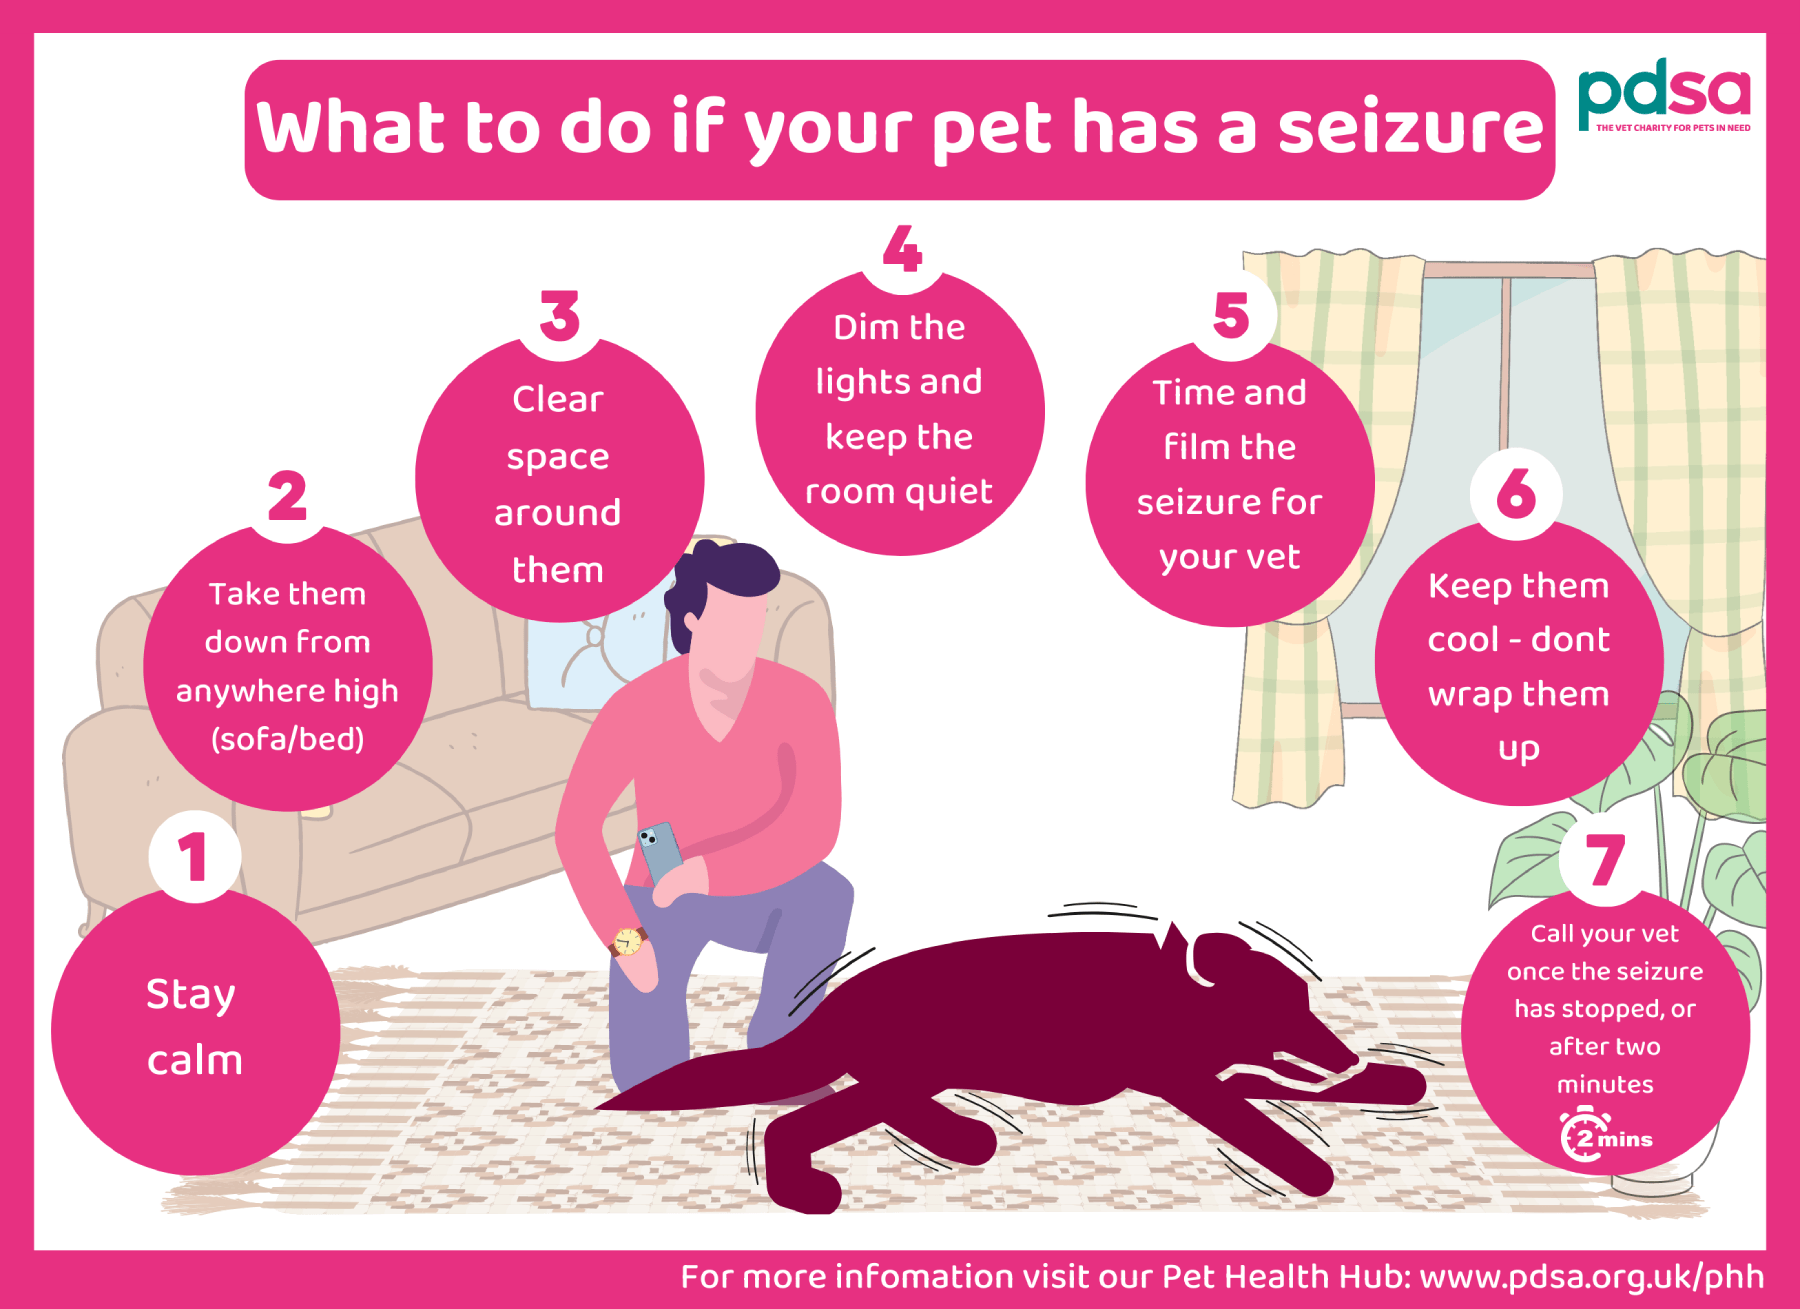 An infographic showing what to do if your pet has a seizure